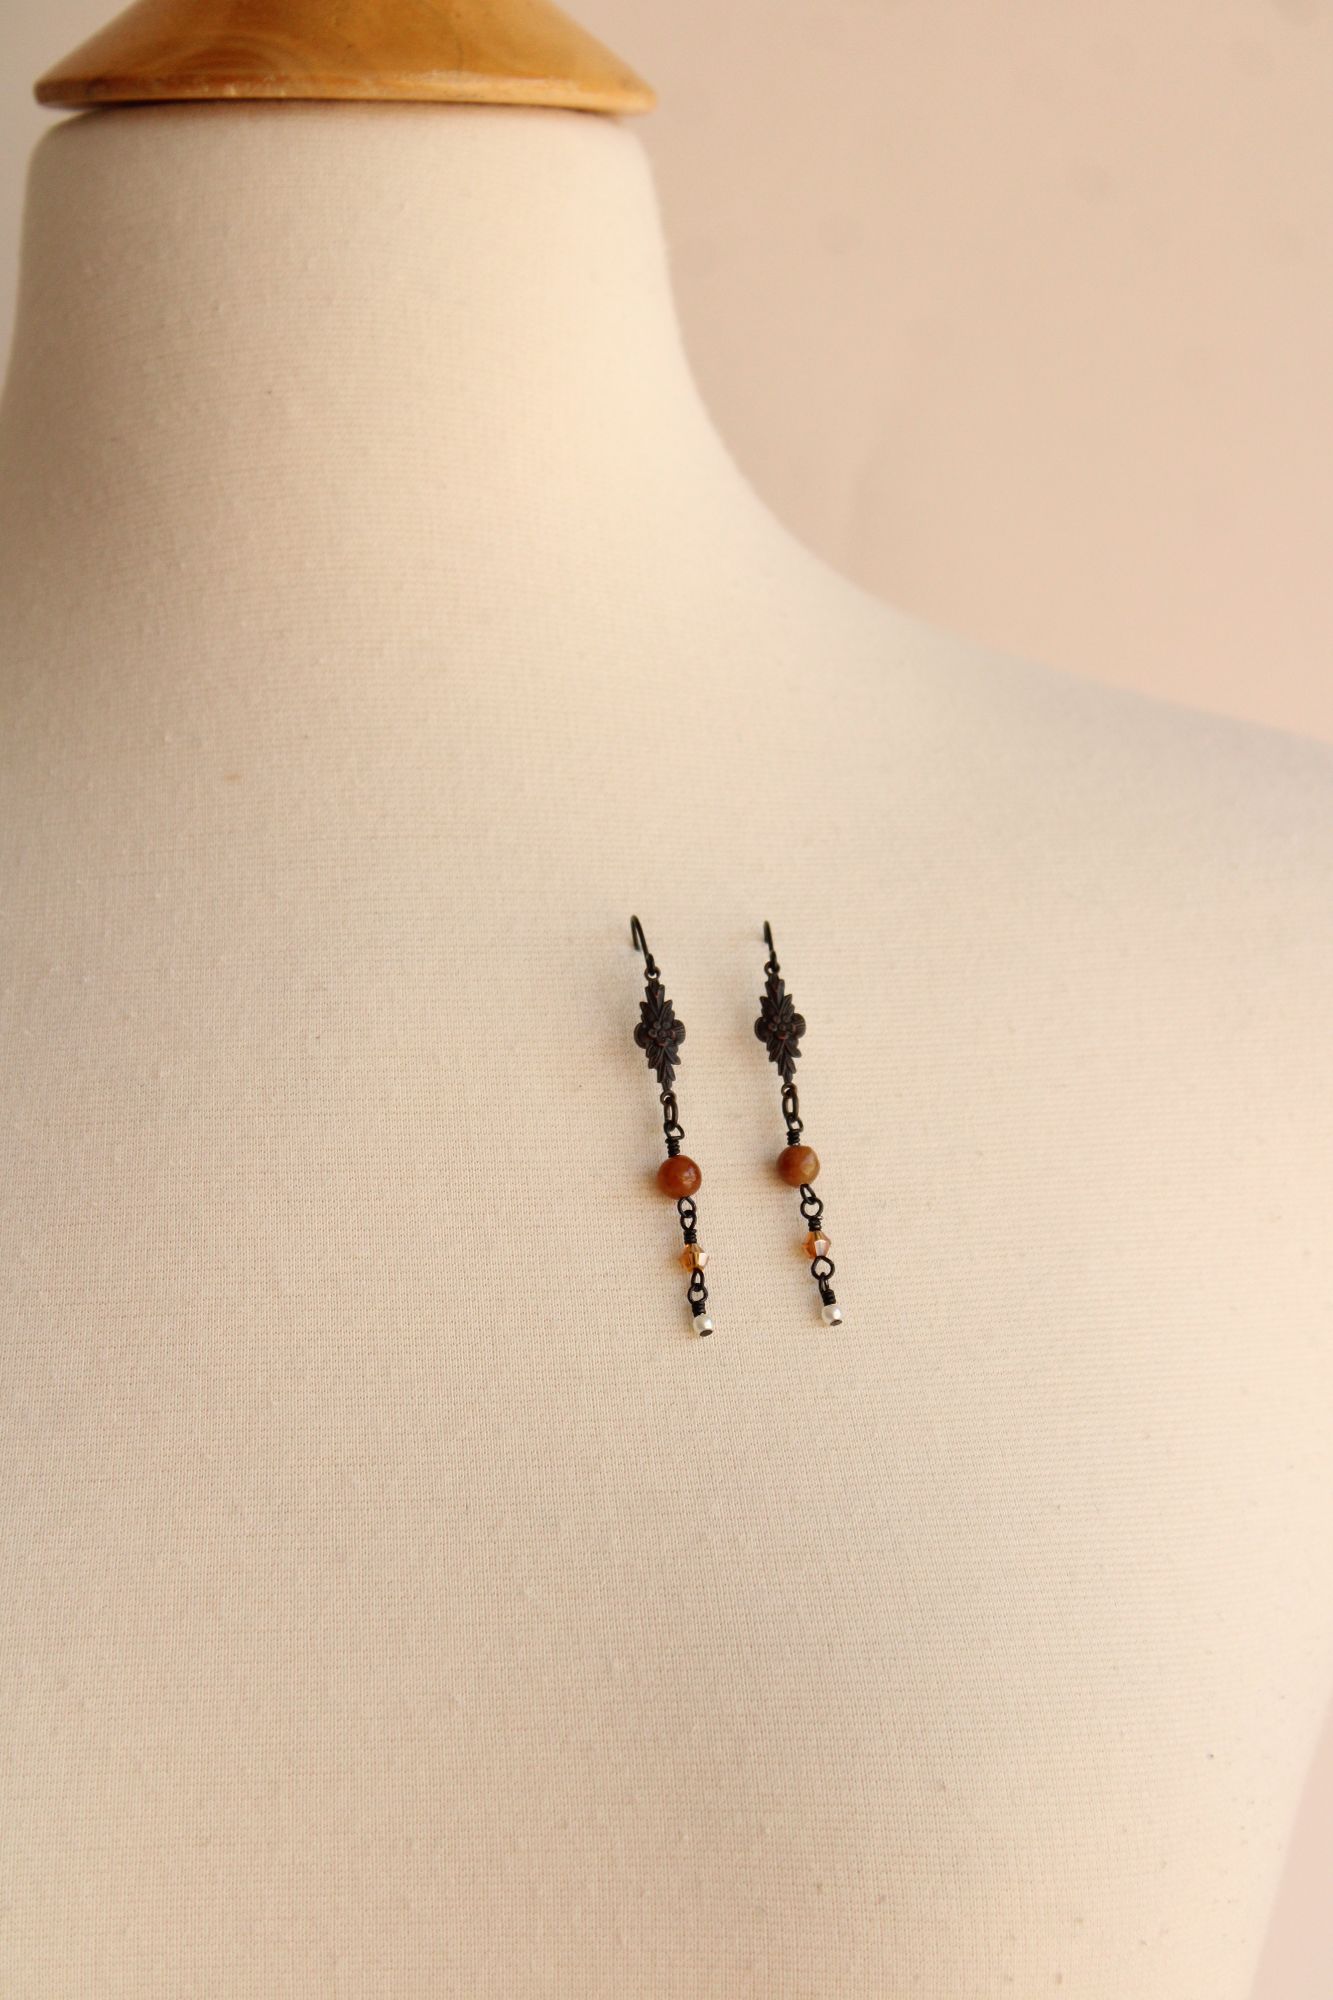 Handmade Women's Earrings, Black Metal with Brown Beads and a Faux Pearl Dangles